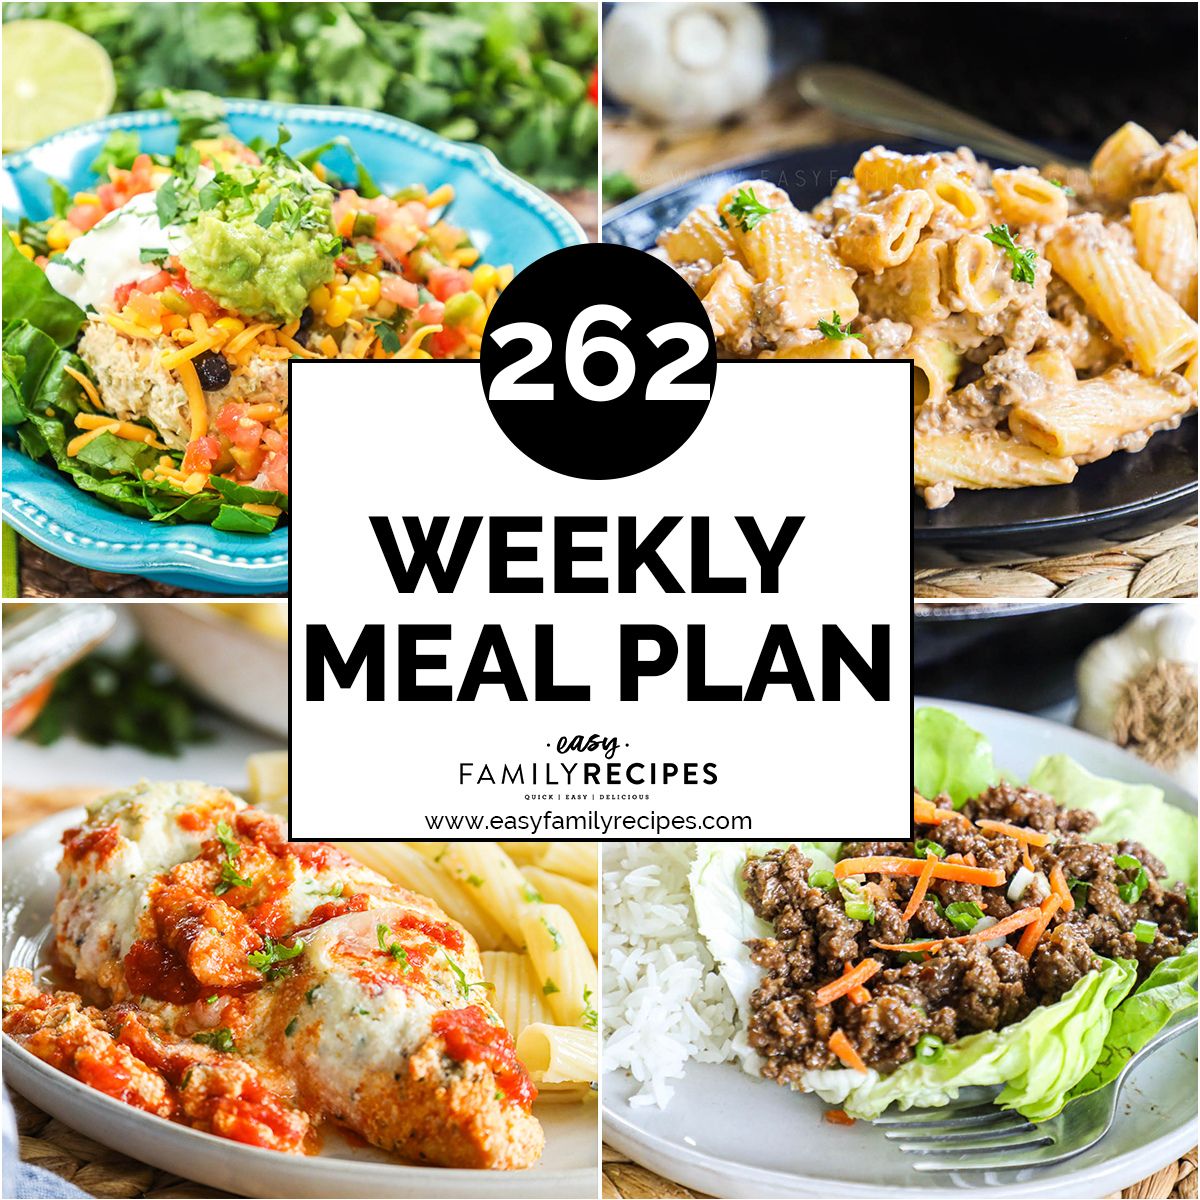 4 plated dinners for free meal plan #262